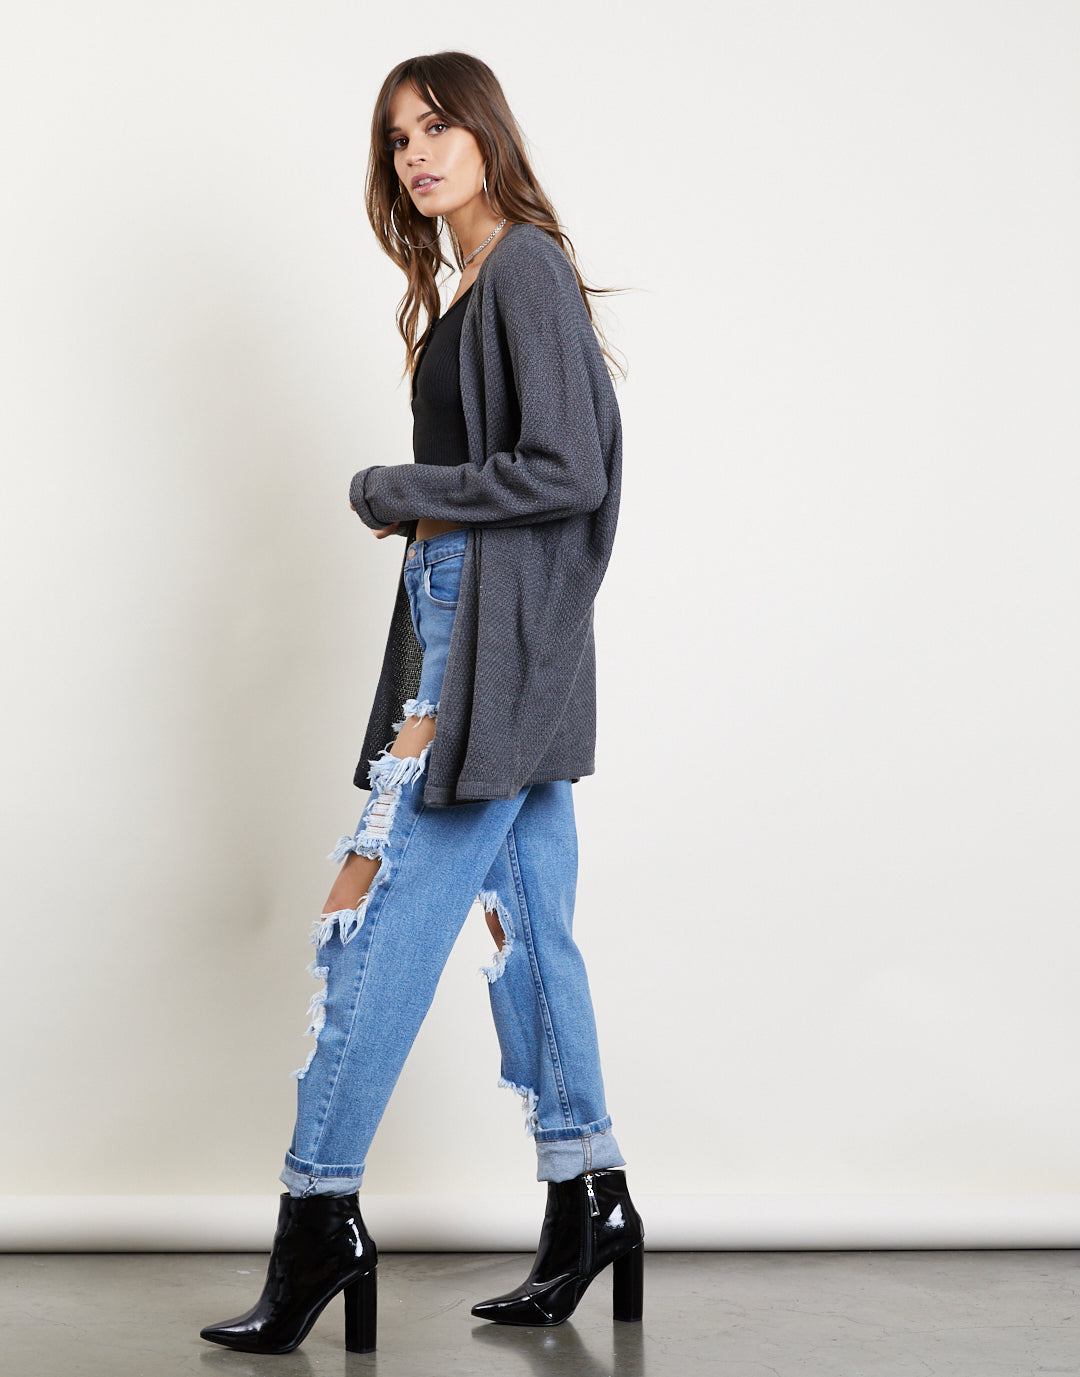 Textured Cuffed Sleeves Cardigan Outerwear Charcoal S/M -2020AVE